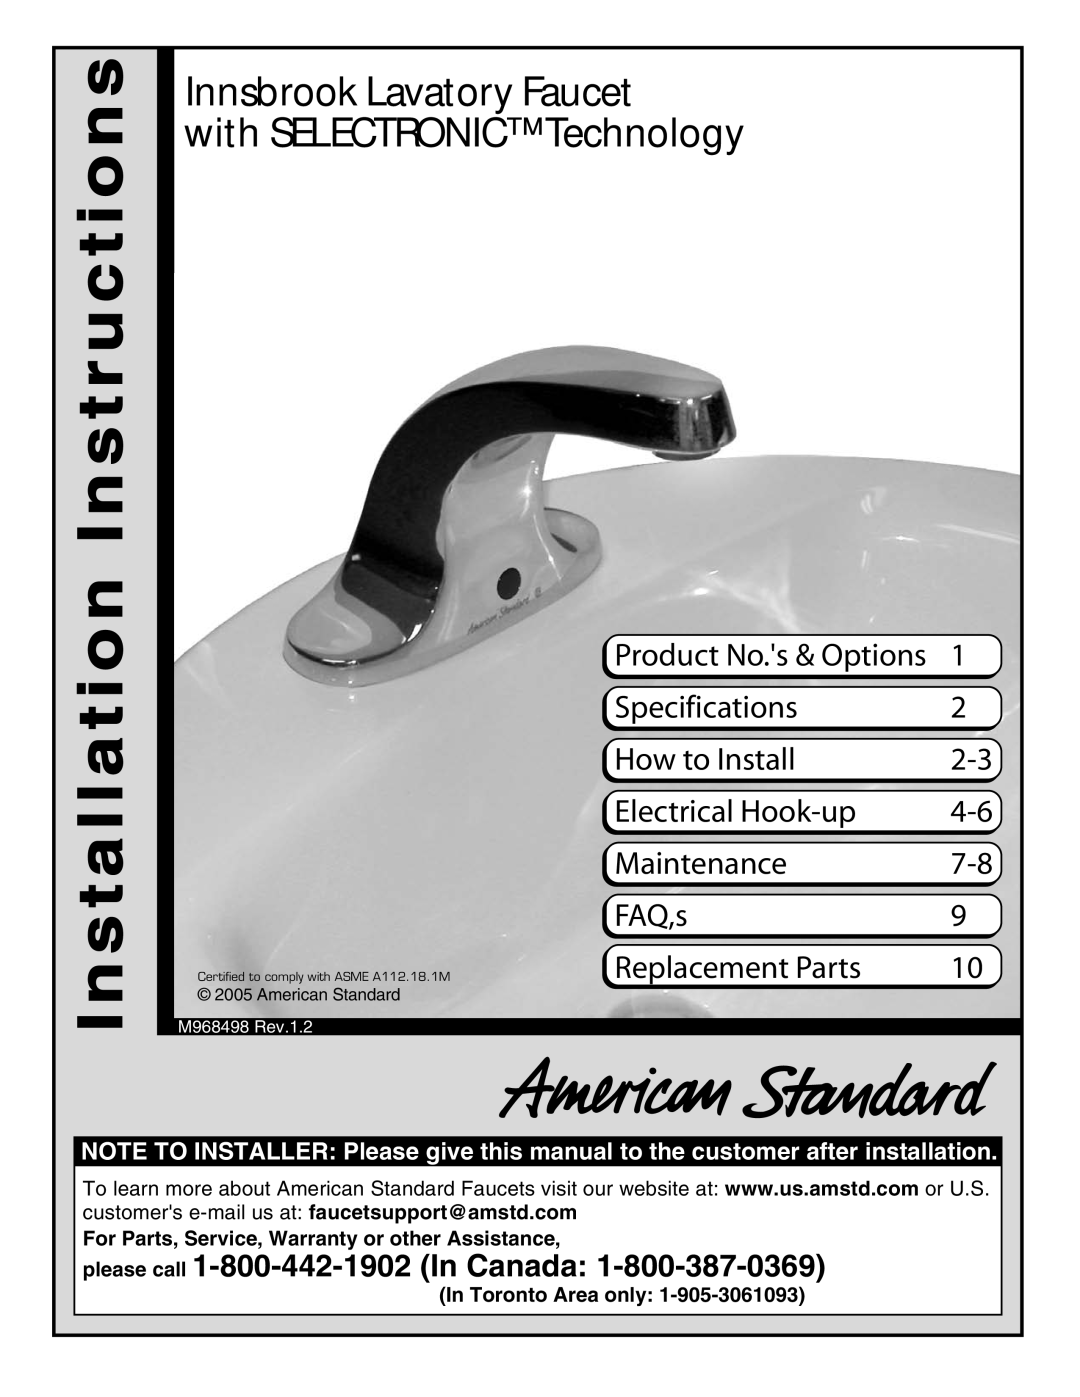 American Standard M968498 warranty Innsbrook Lavatory Faucet, with SELECTRONIC Technology, Specifications, How to Install 